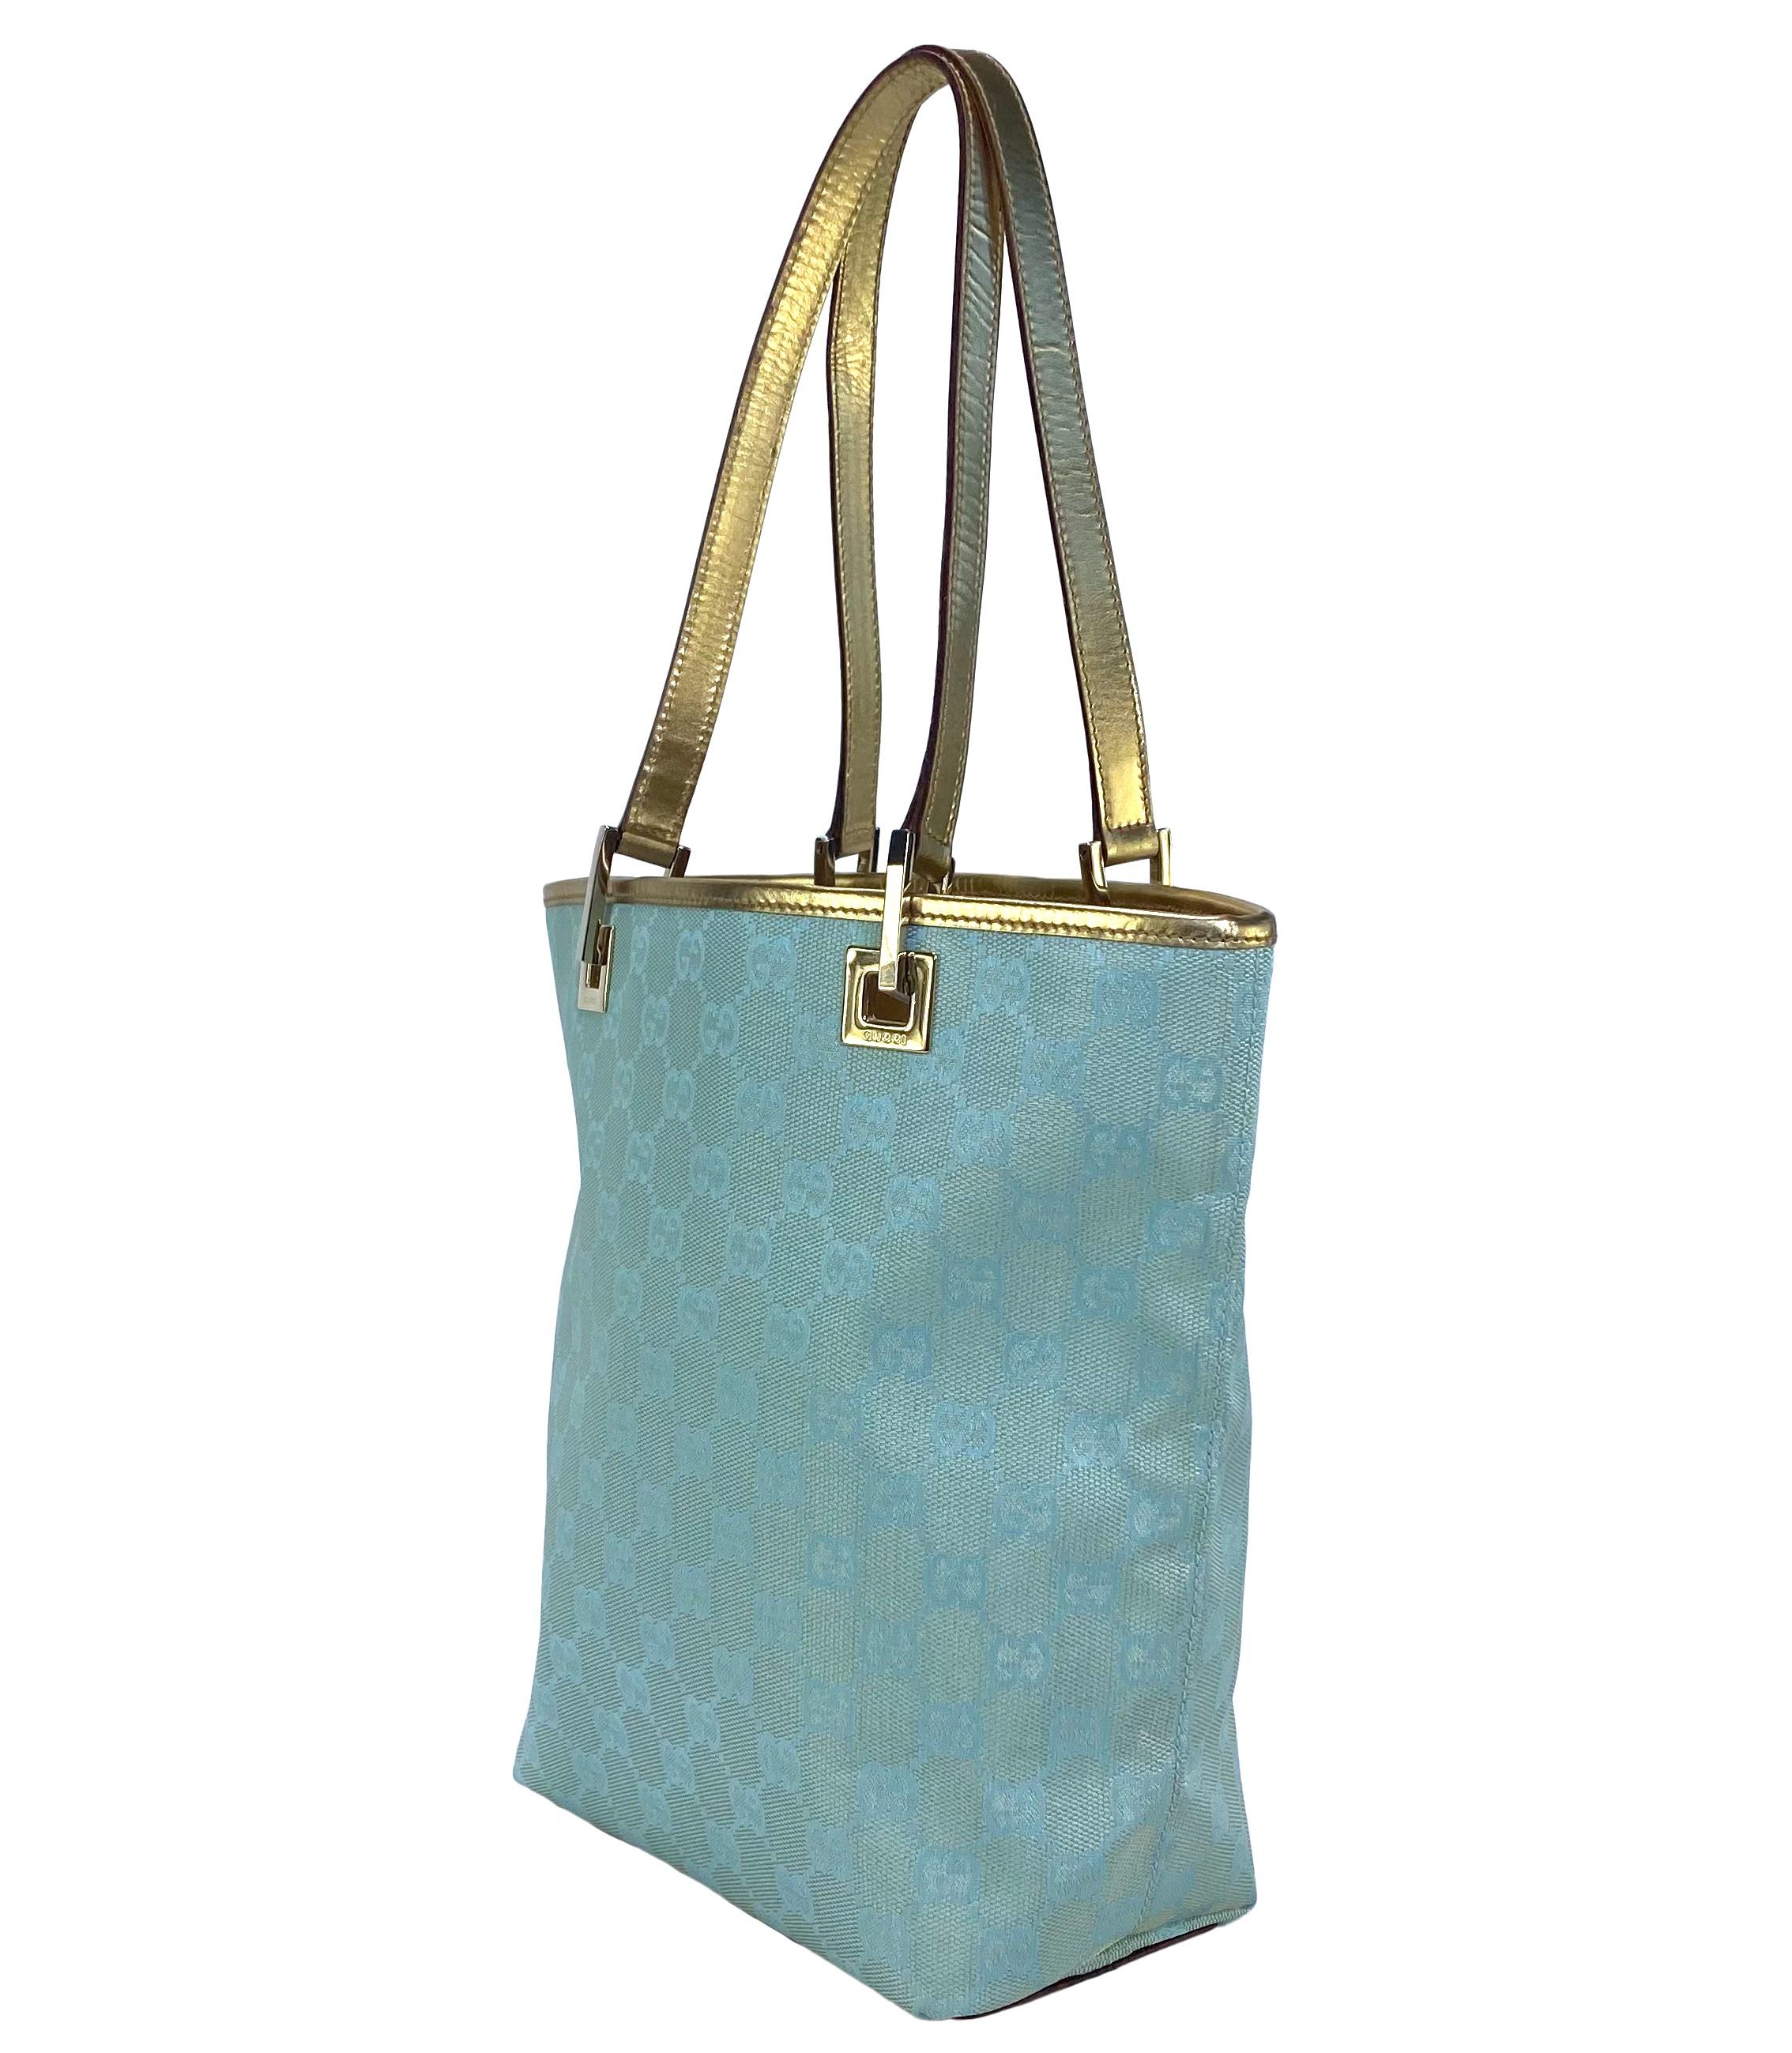 TheRealList presents: a Y2K dream Gucci bag, designed by Tom Ford. This small tote, from the Fall/ Winter 2000 collection, this bag features a light blue and gold metallic GG monogram woven canvas with gold leather trim. Perfect for everyday use,